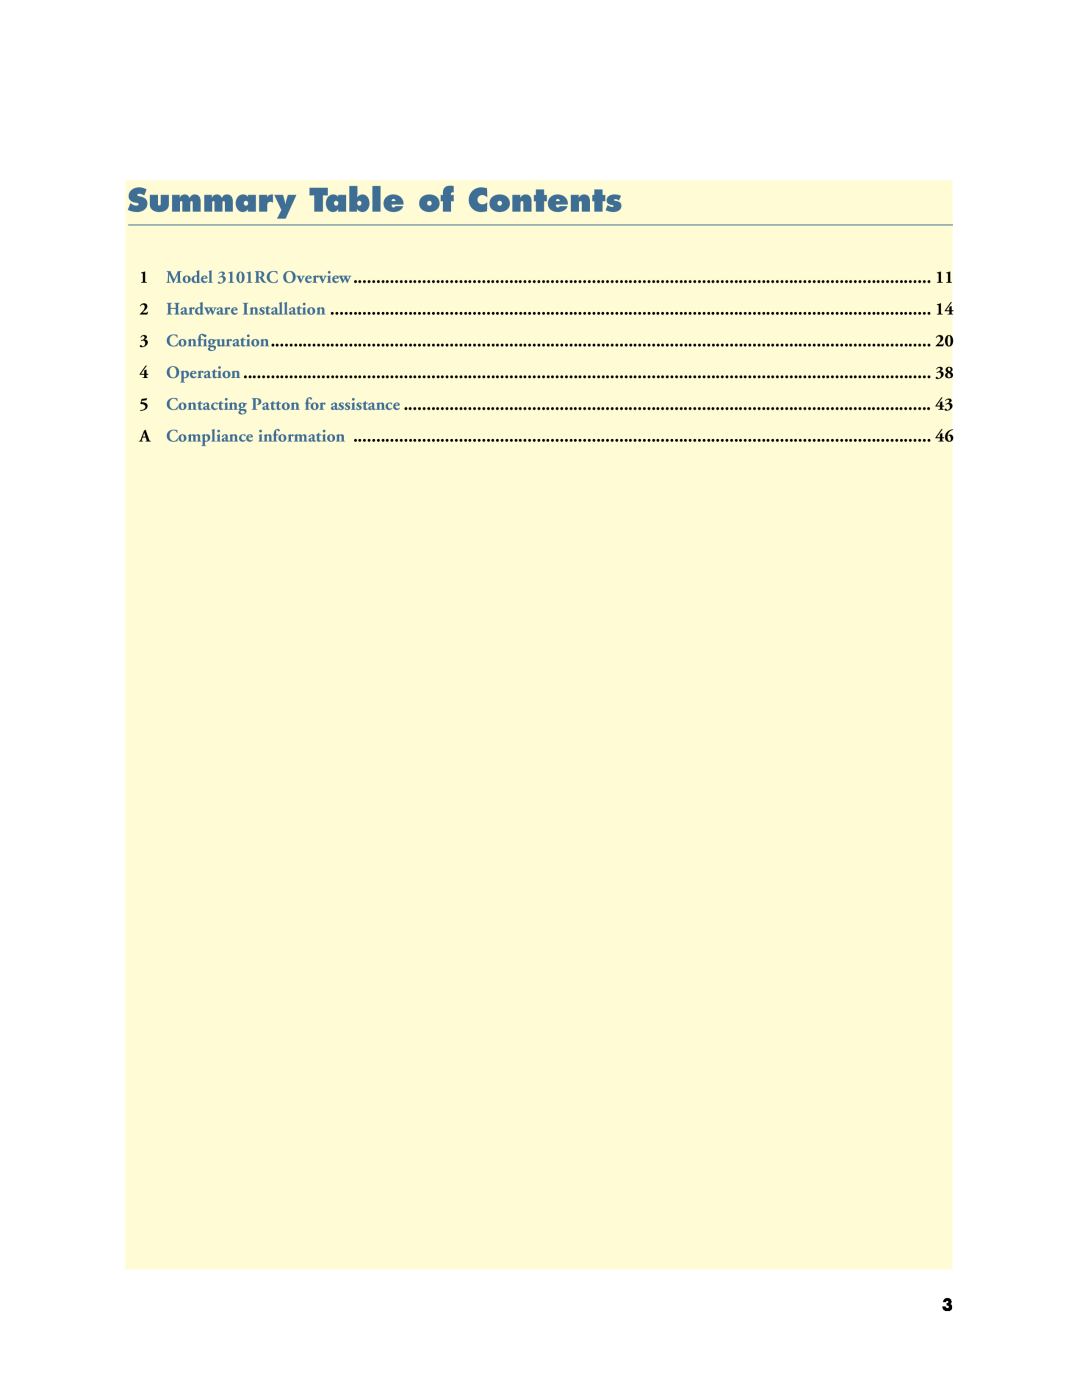 Patton electronic Summary Table of Contents, Model 3101RC Overview, Hardware Installation, Configuration, Operation 